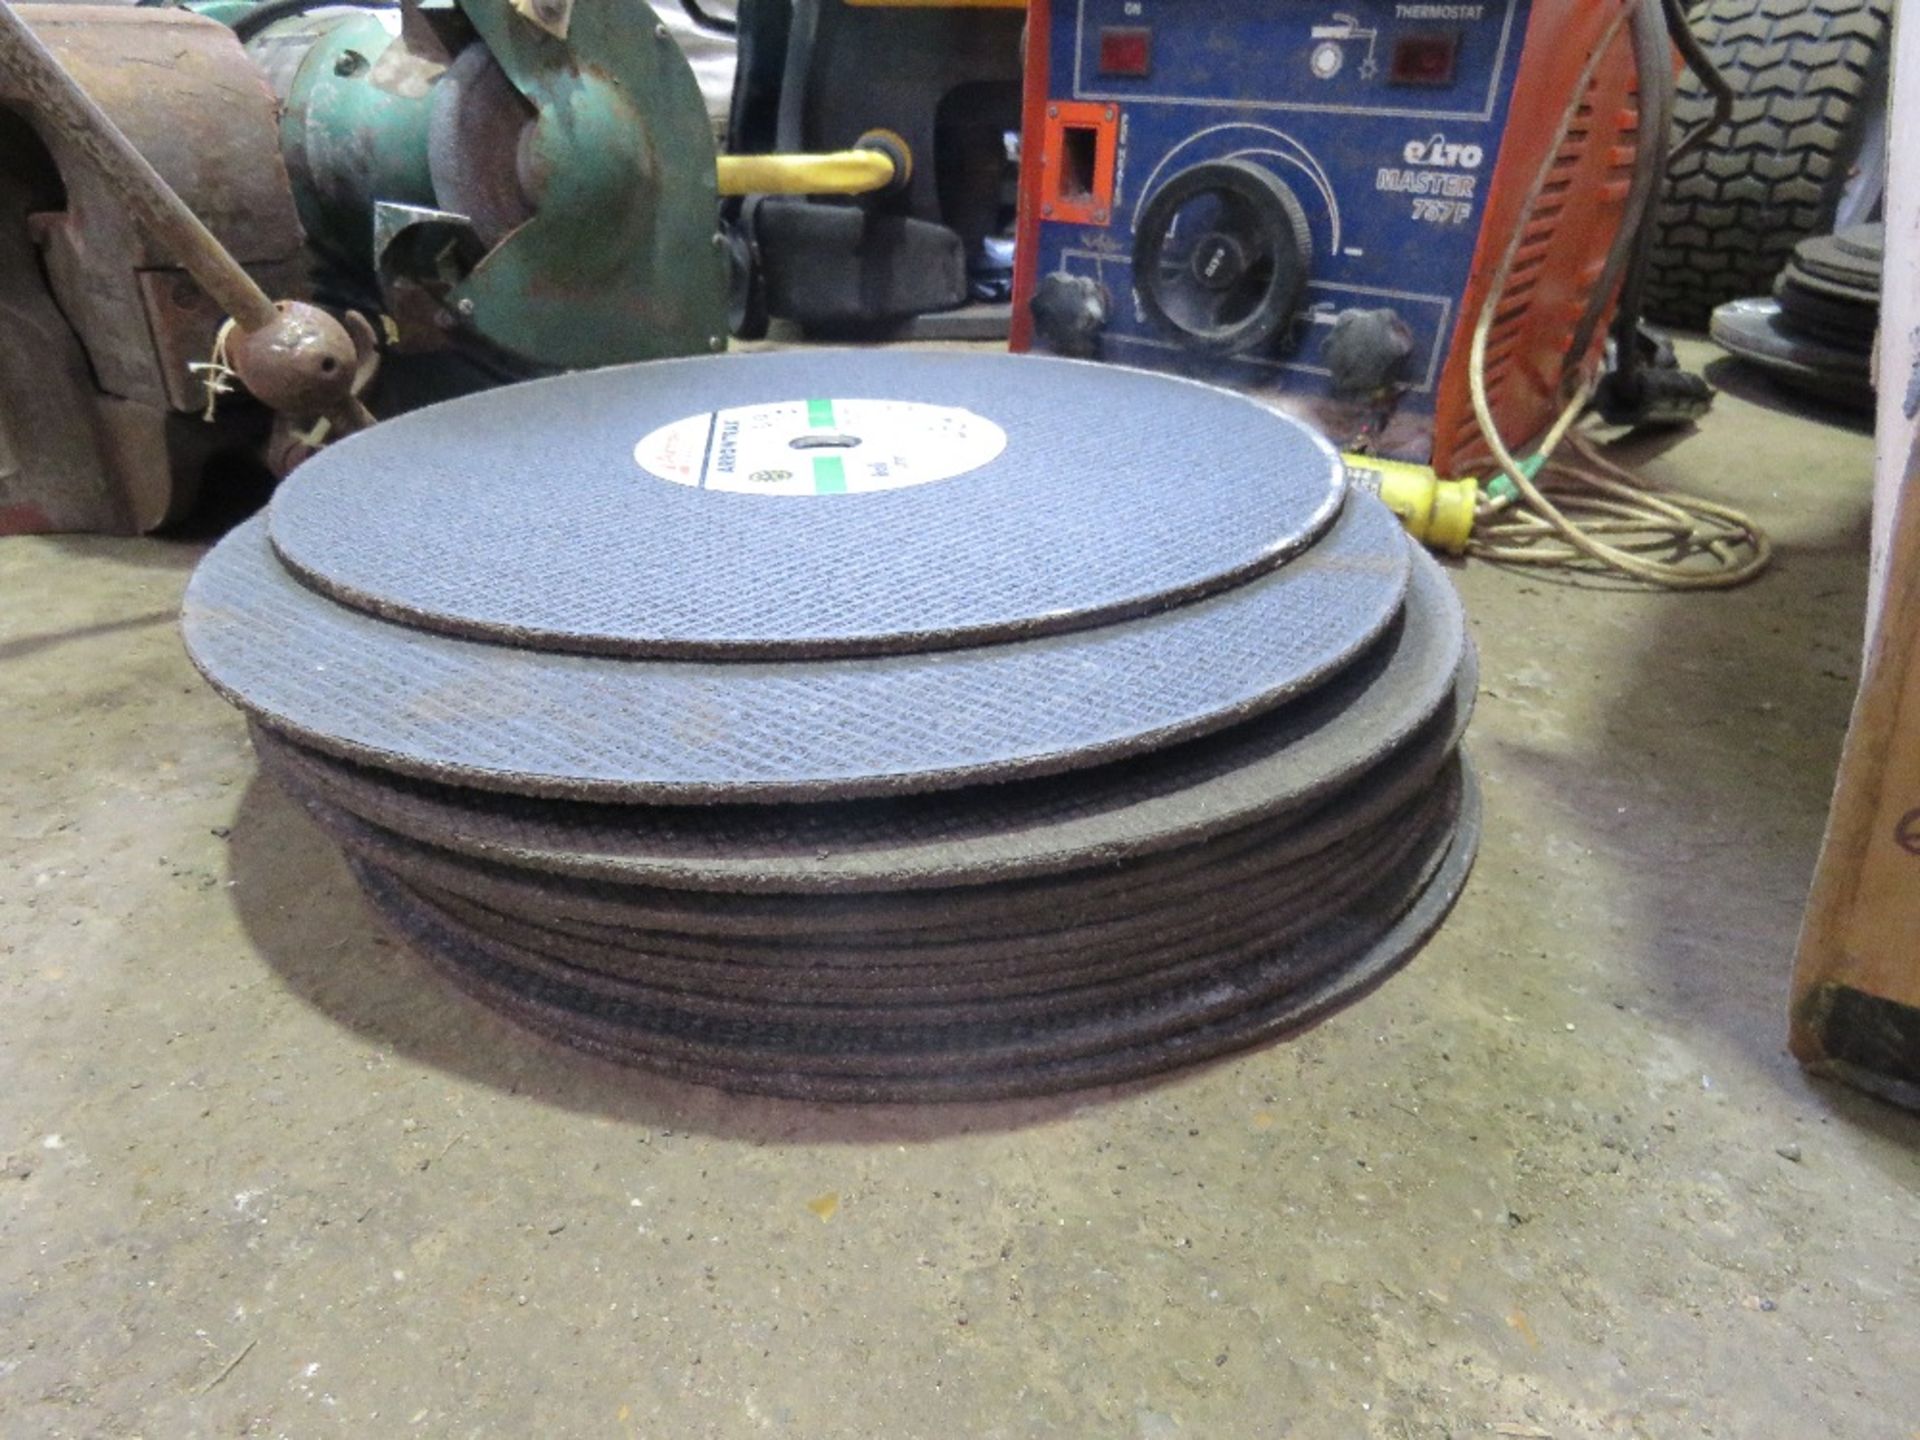 QUANTITY OF METAL CUTTING DISCS 356X4 SUITABLE FOR RAIL CUTTING. SOURCED FROM SITE CLOSURE/CLEARANCE - Image 2 of 2